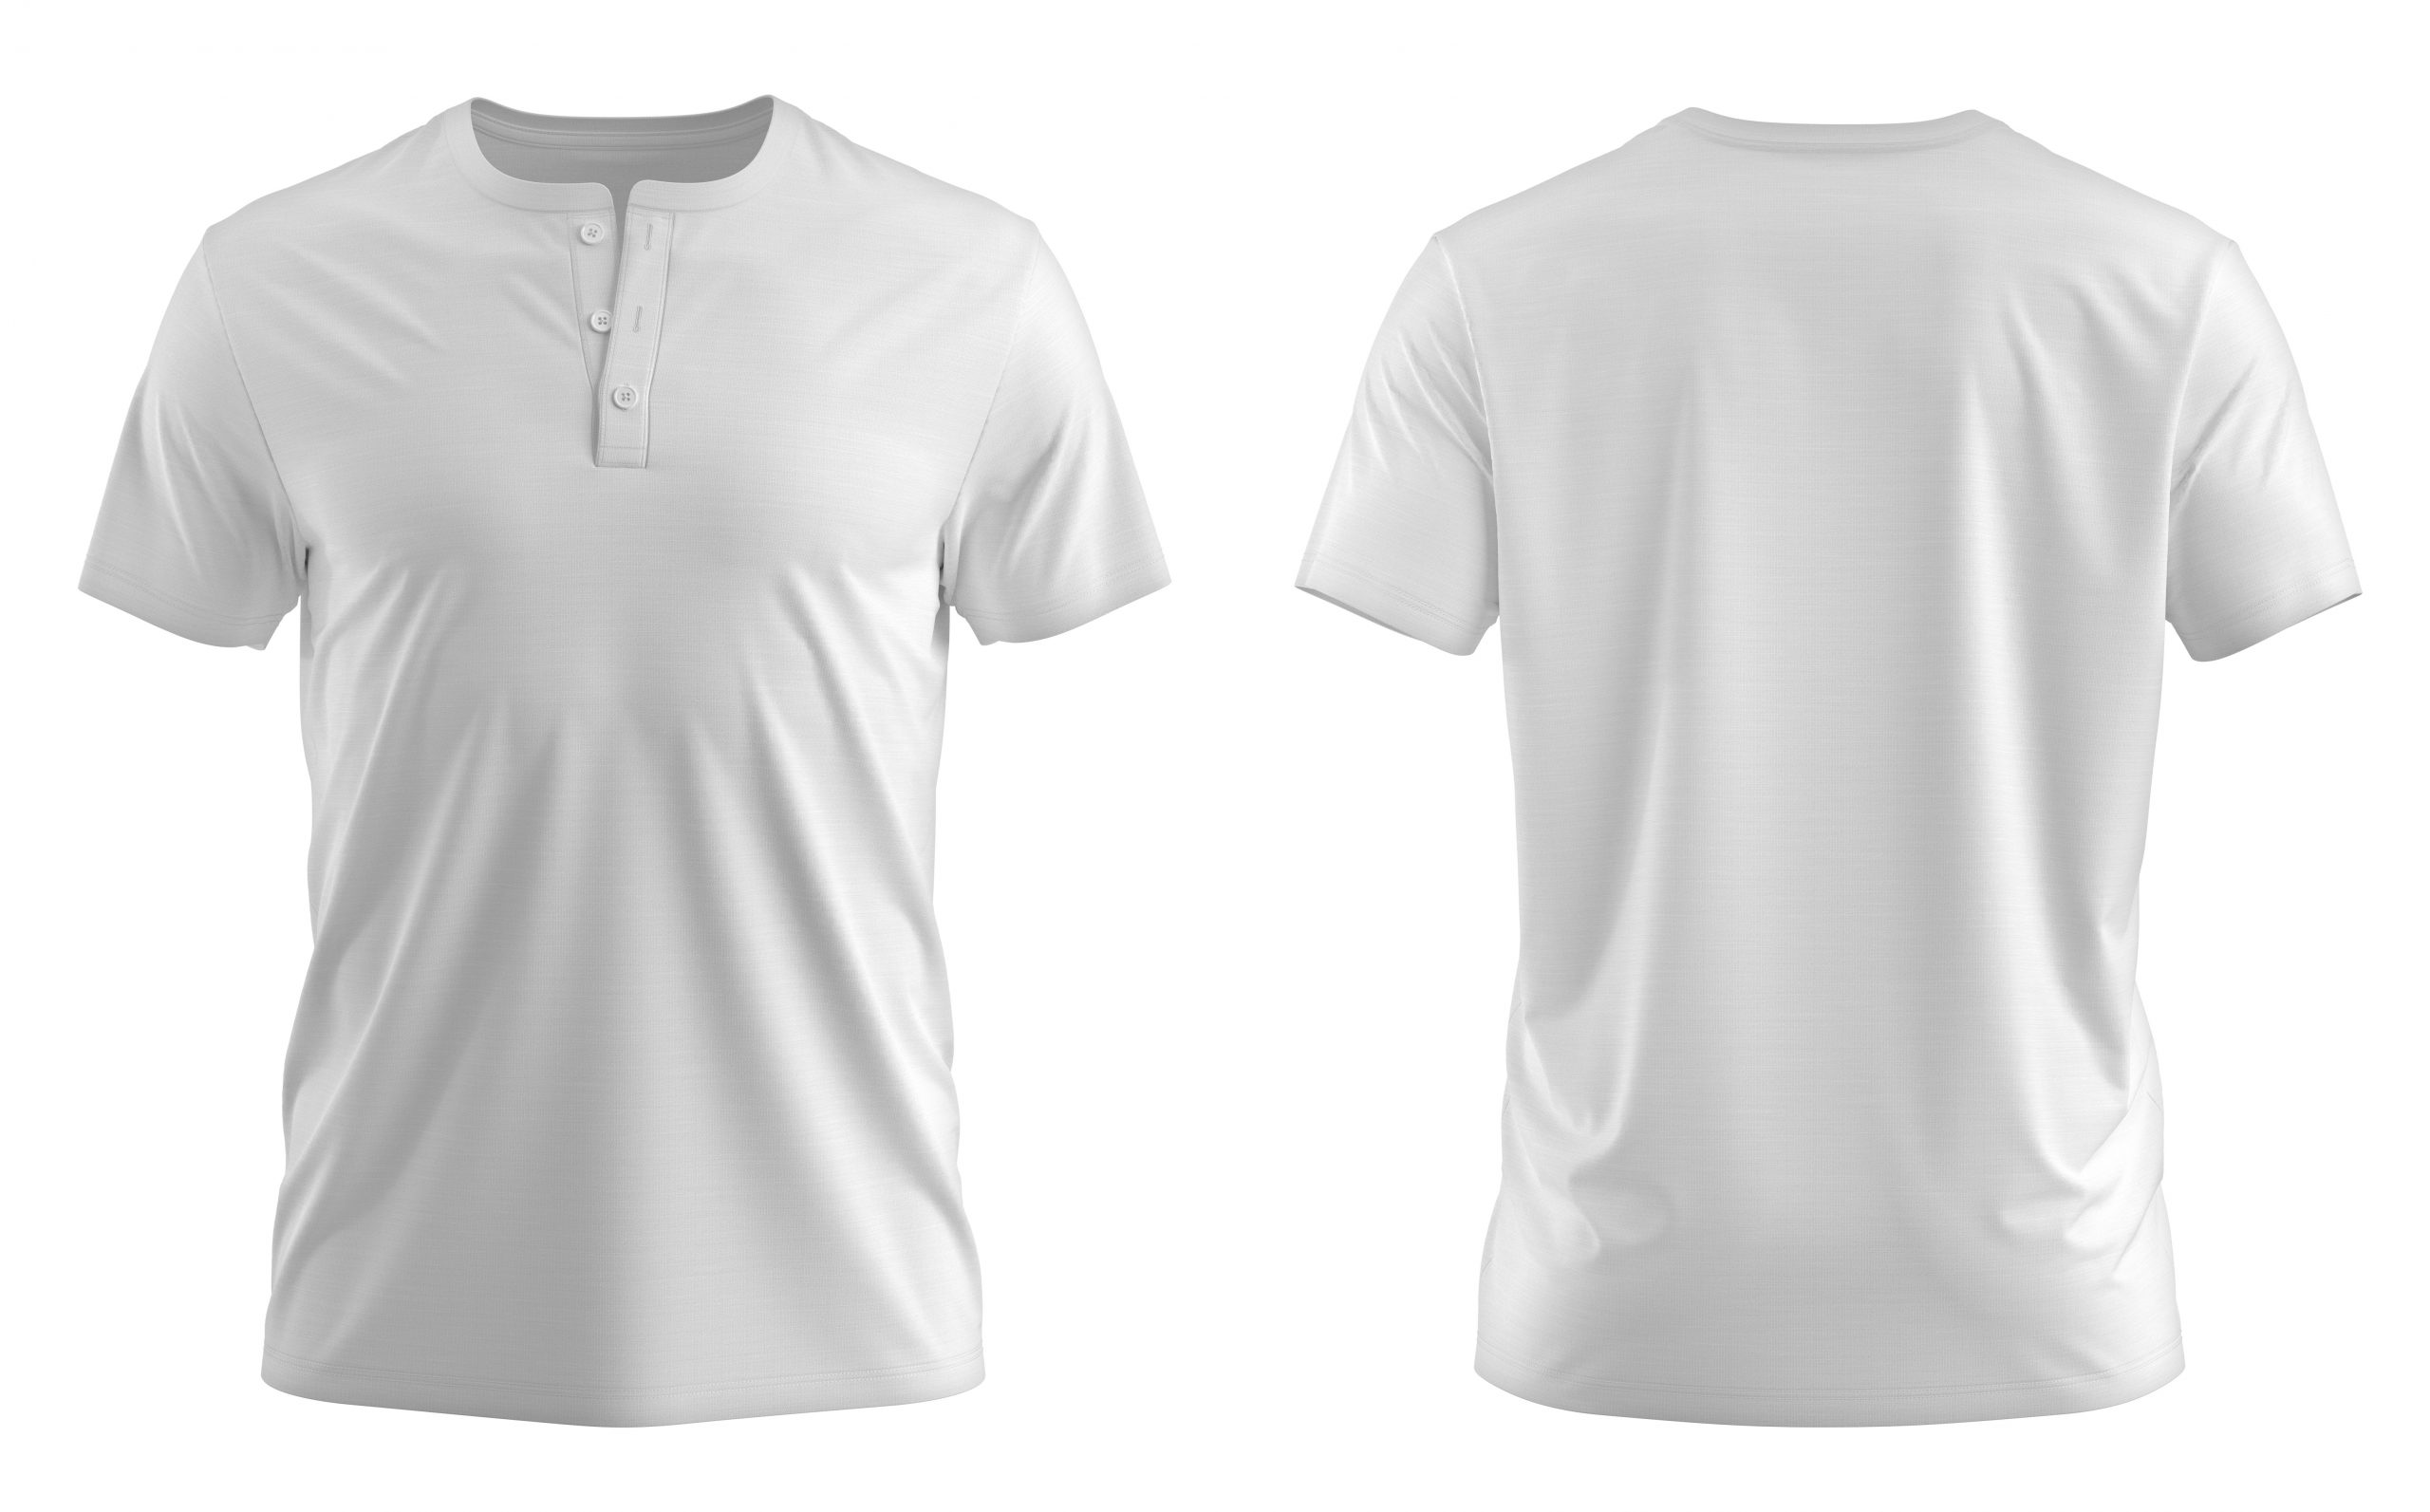 The Best Men’s Short-Sleeved Henley | Reviews, Ratings, Comparisons